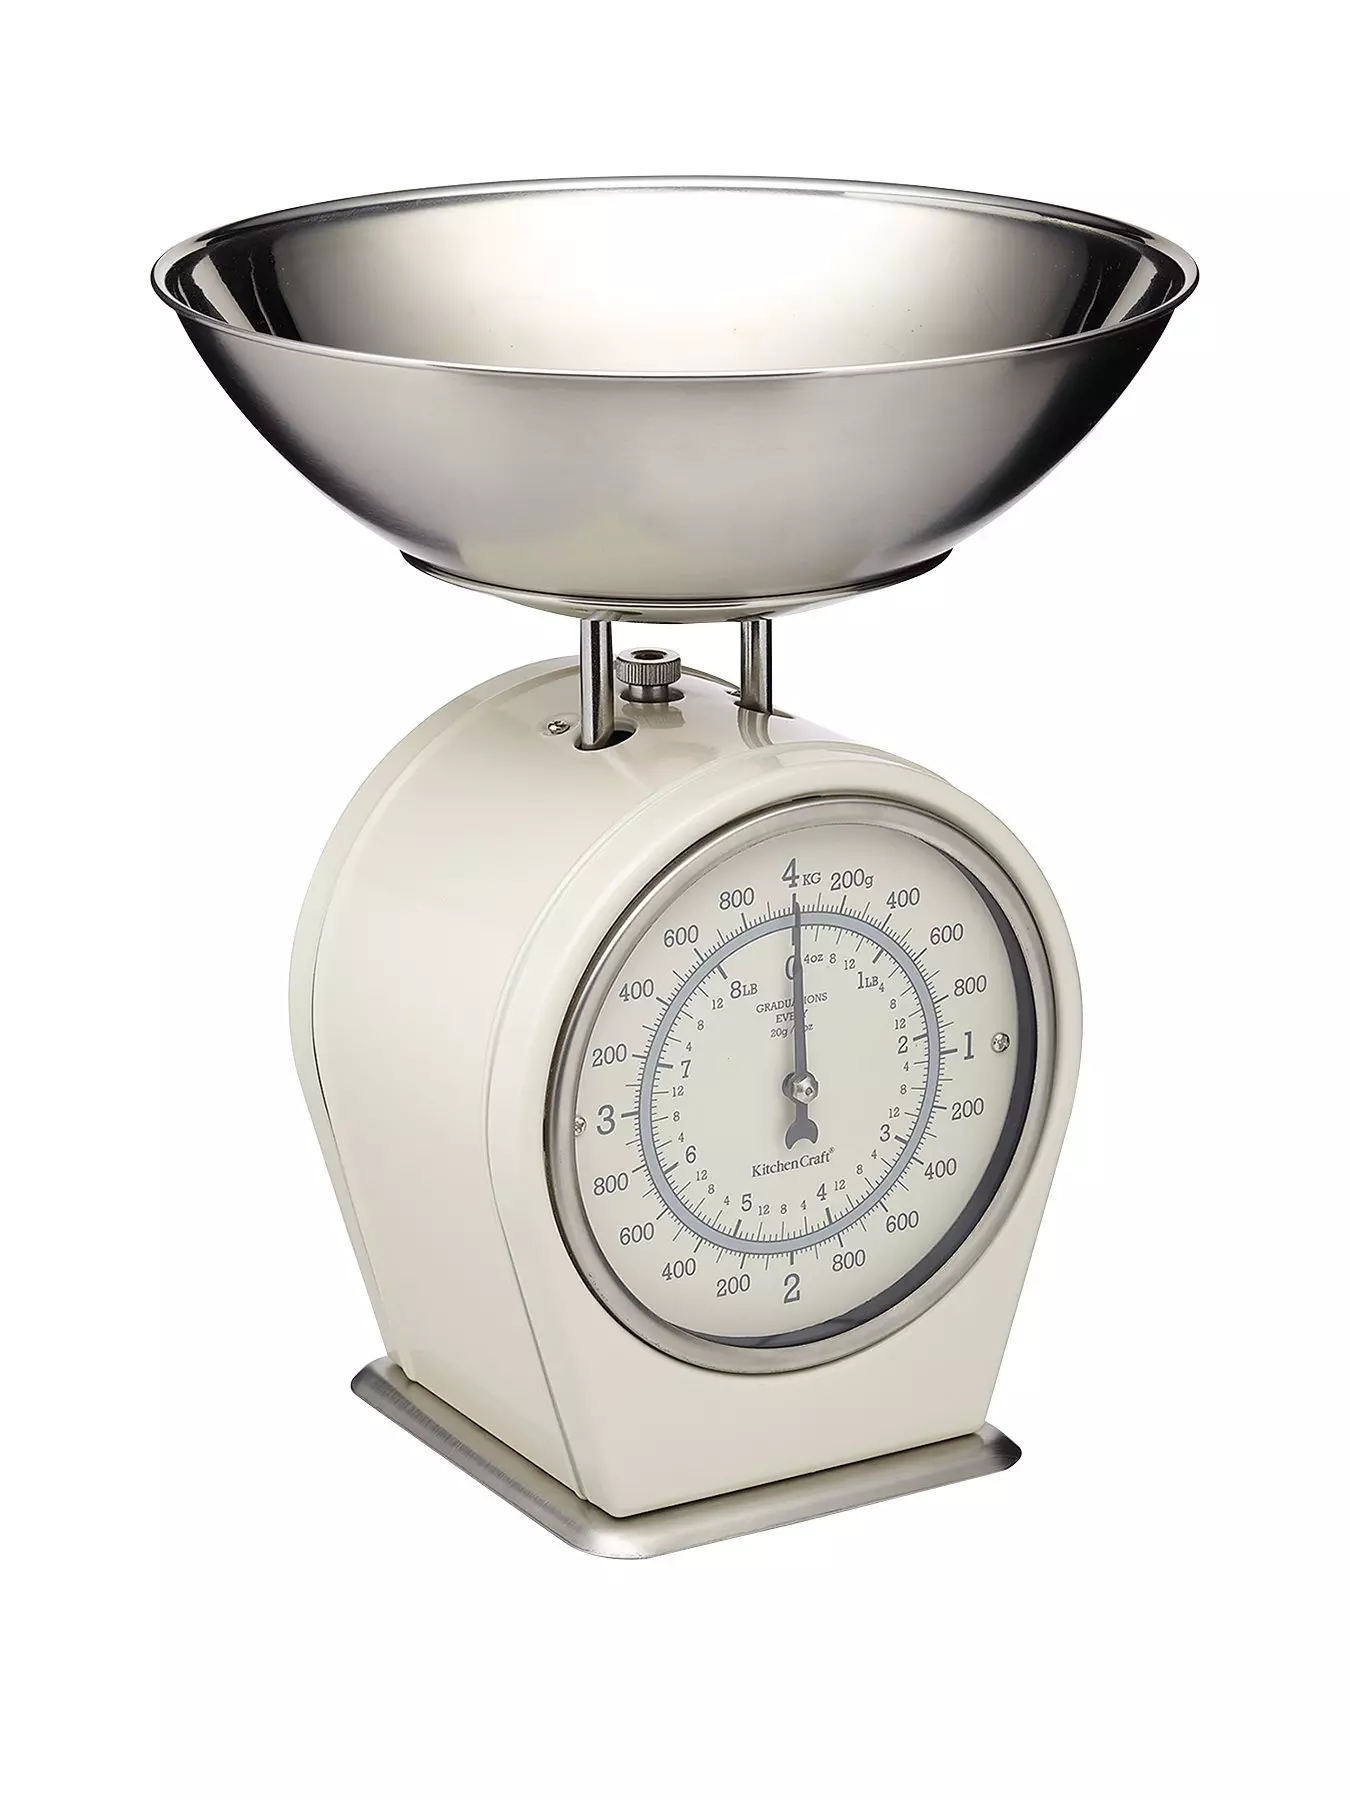 Taylor Mechanical Kitchen Weighing Food Scale Weighs Up To 11Lbs, Measures  In Grams And Ounces, Black And Silver